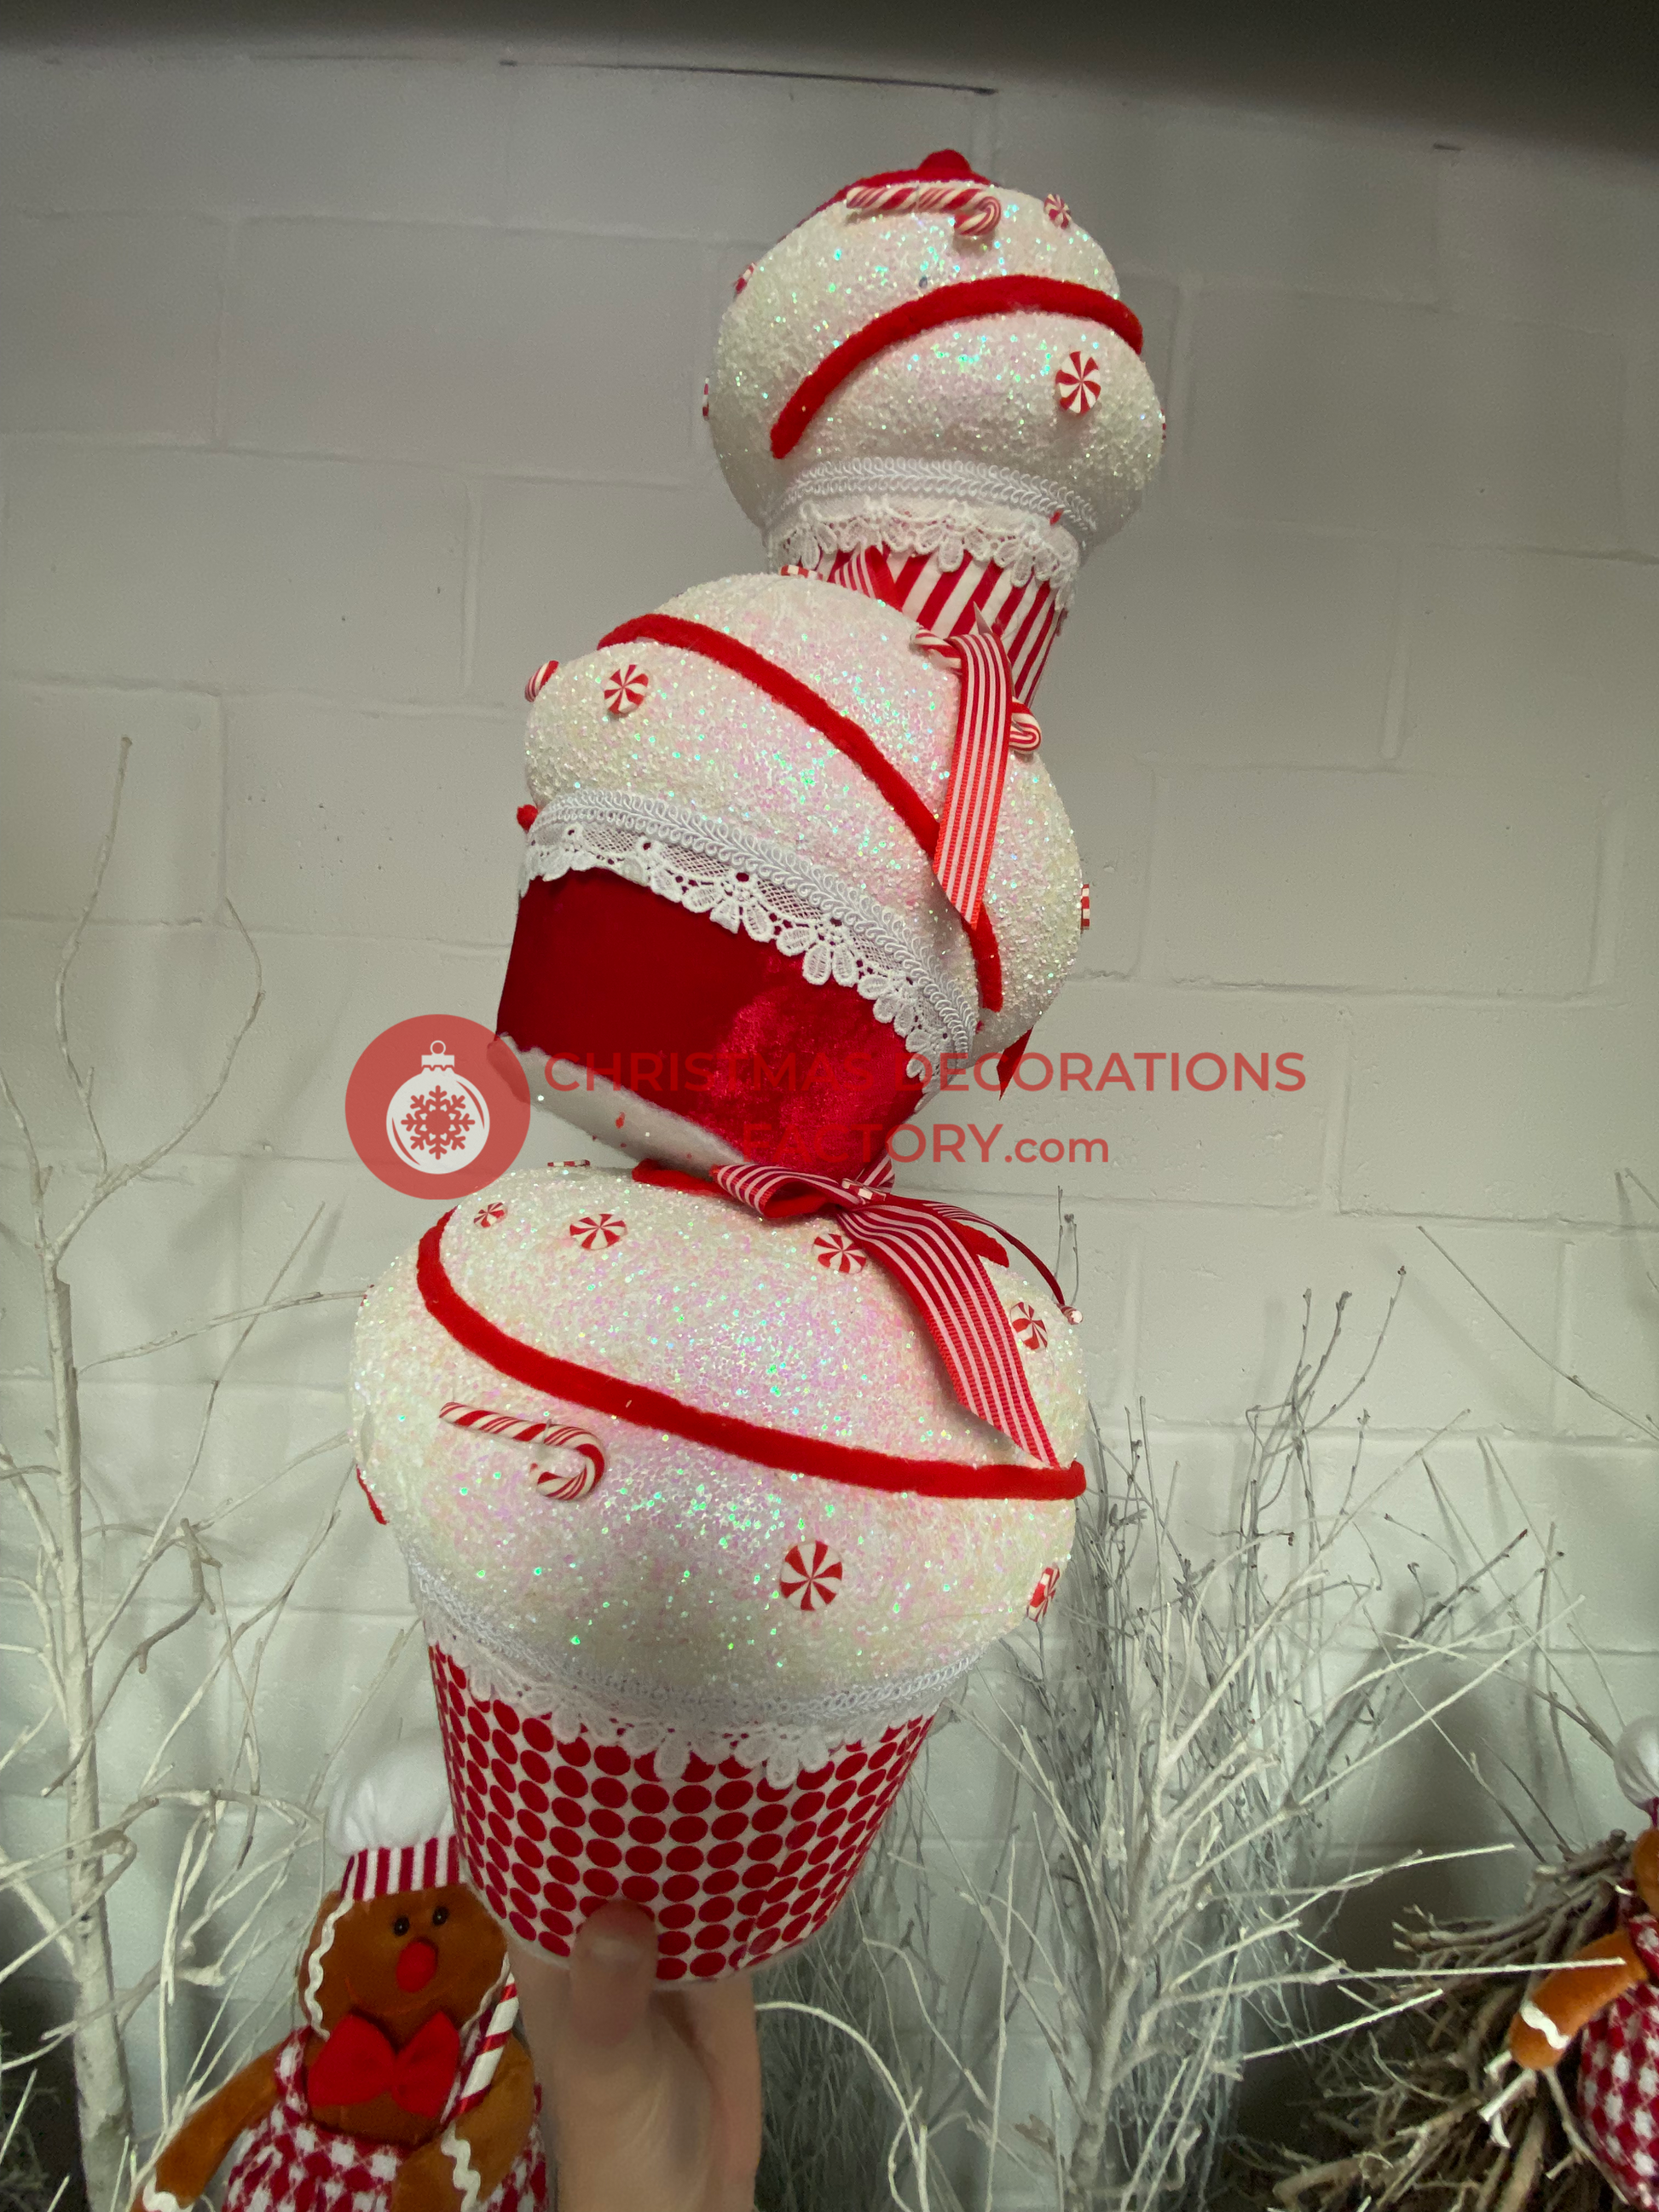 61cm Red and White Fabric Cupcakes Tower